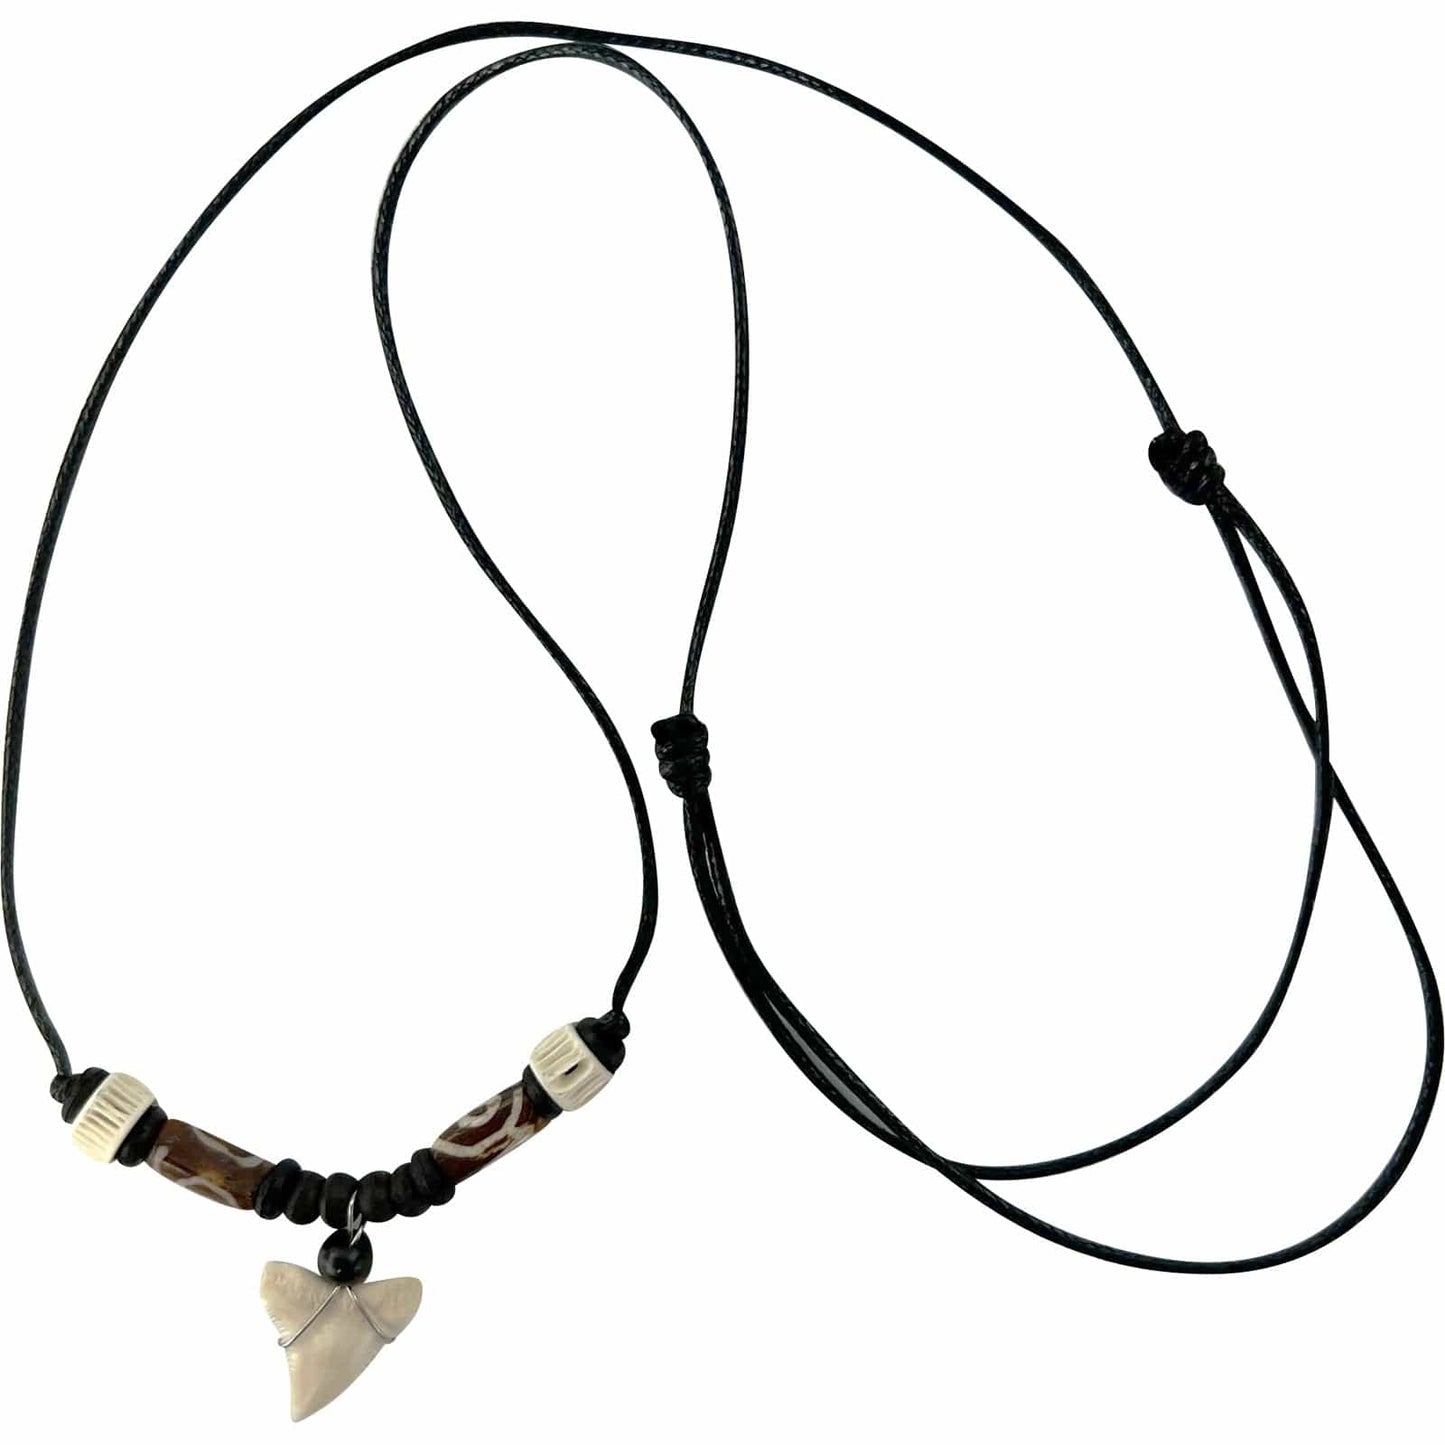 Imitation Resin Shark Tooth Pendant Necklace Wooden Beads Black Cord Chain Mens Womens Jewellery